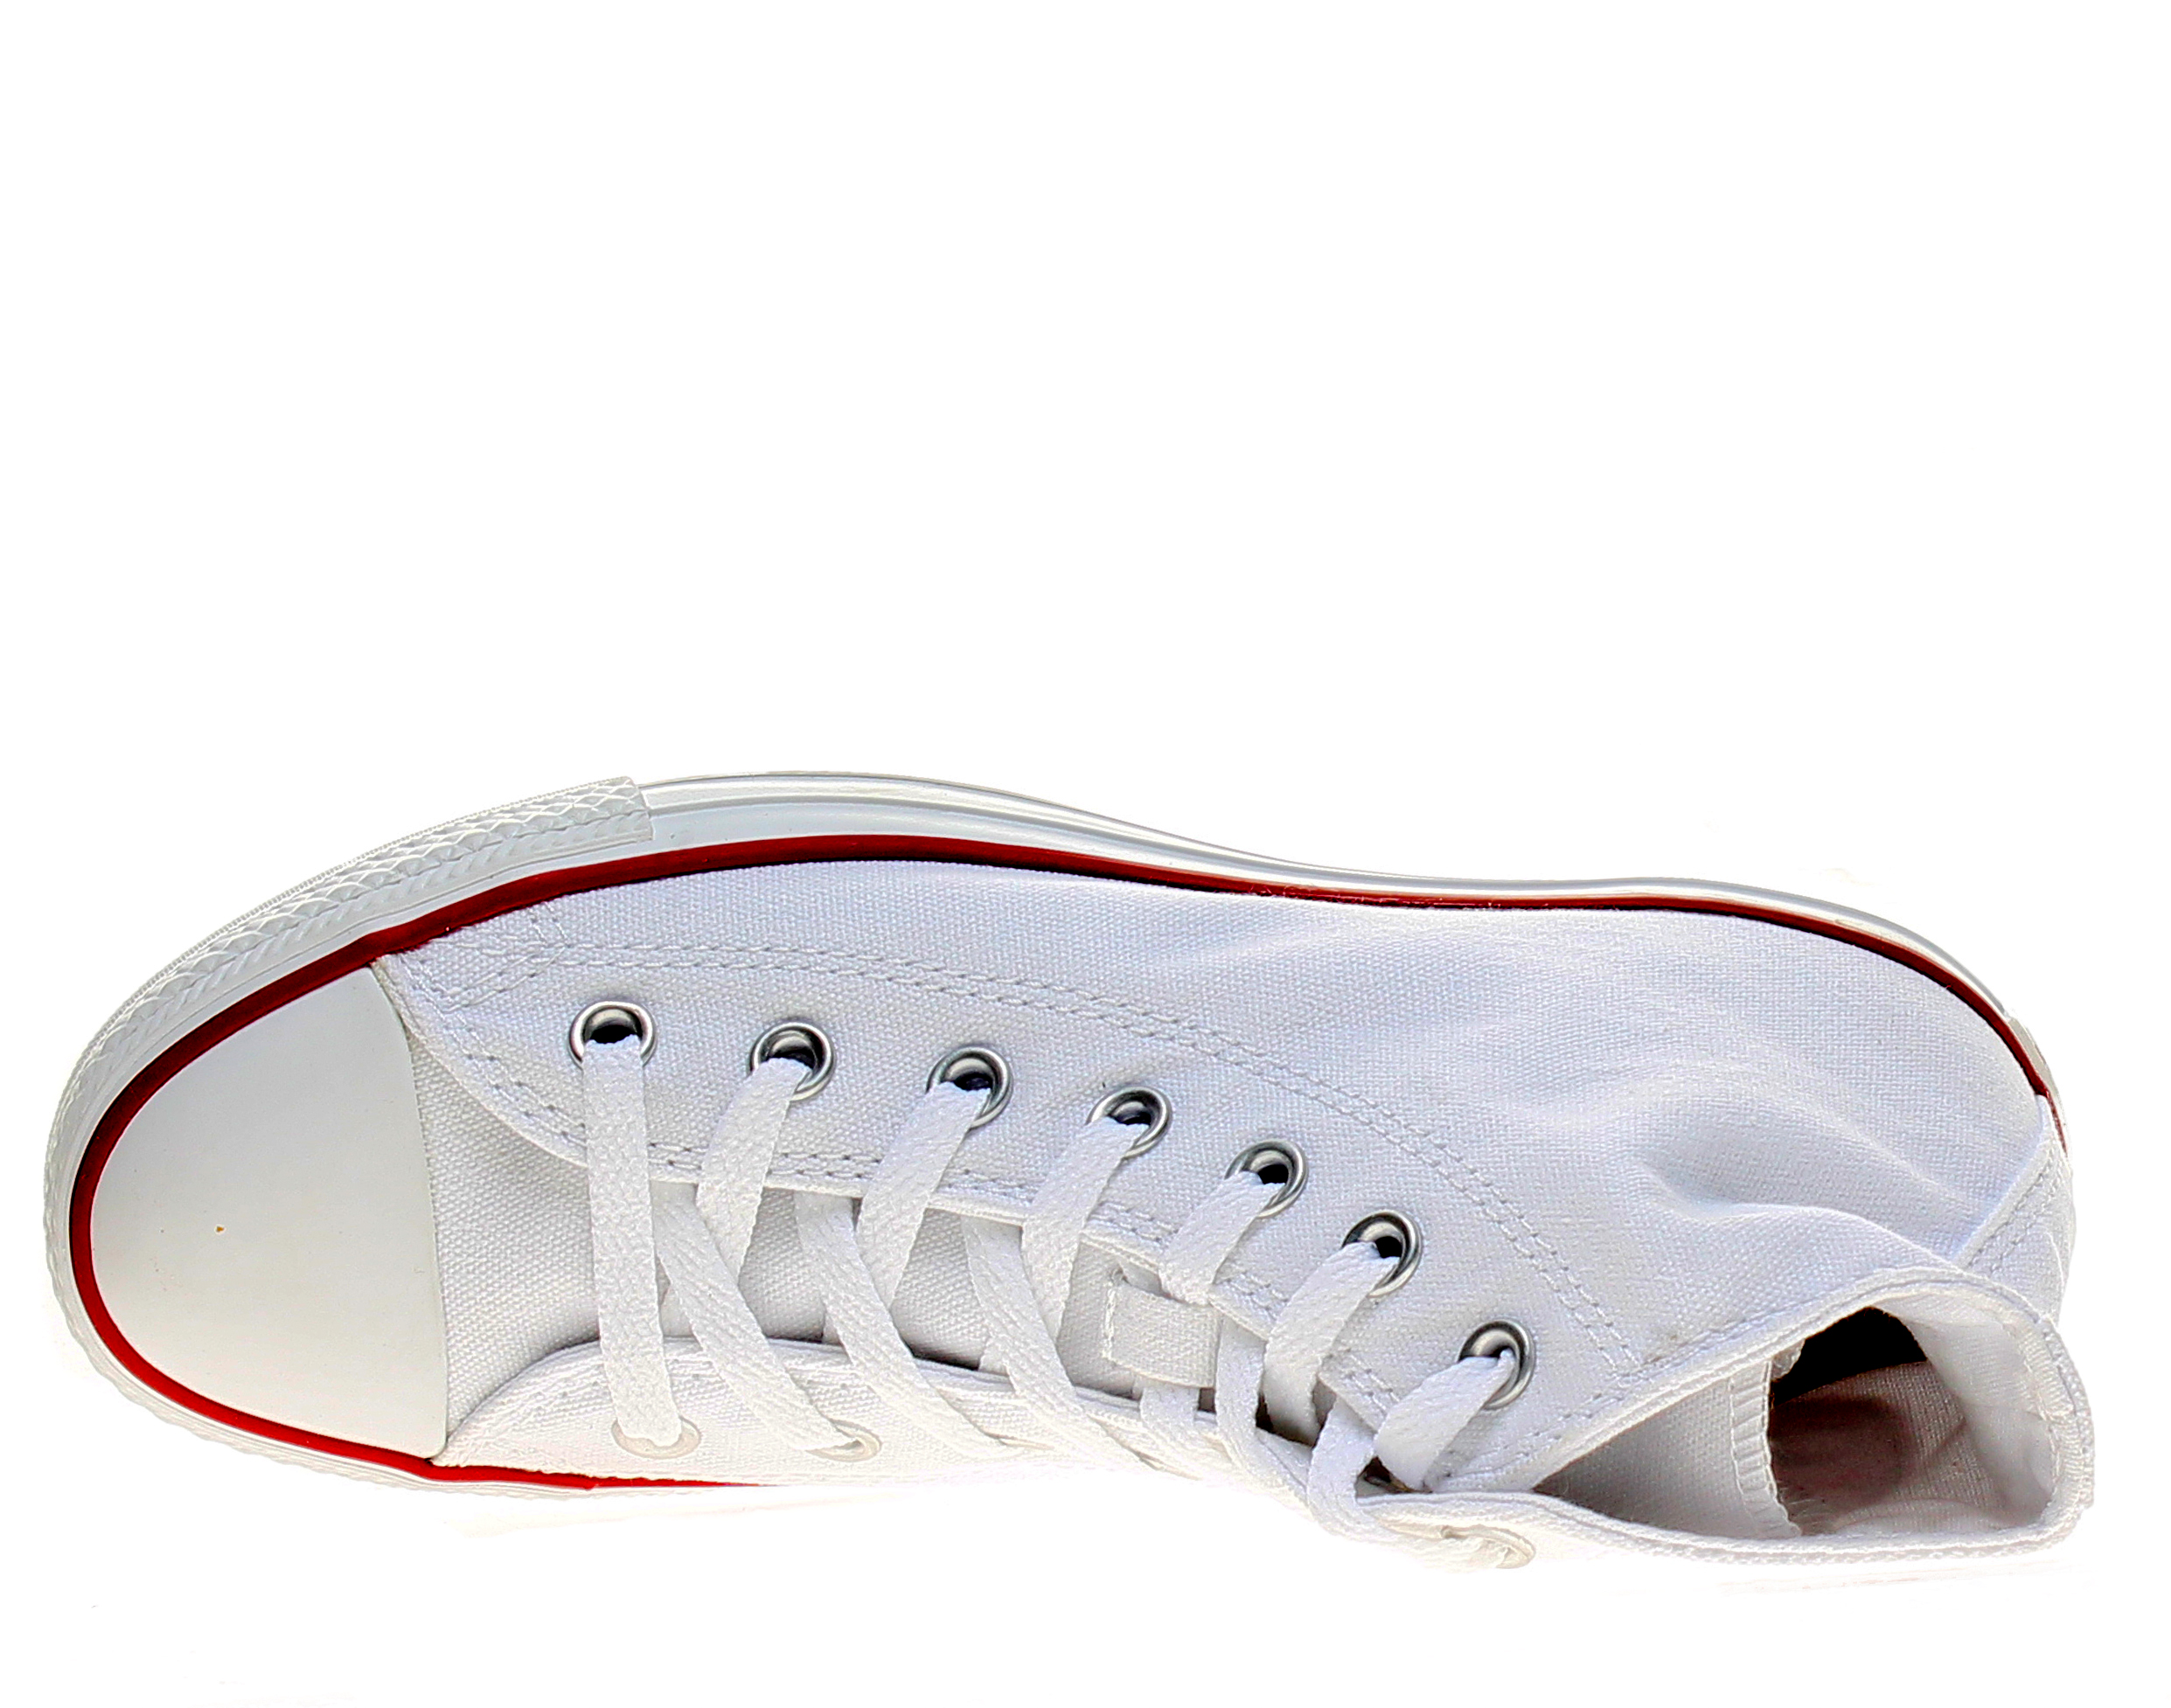 Converse Unisex Chuck Taylor All Star High Top - image 4 of 6